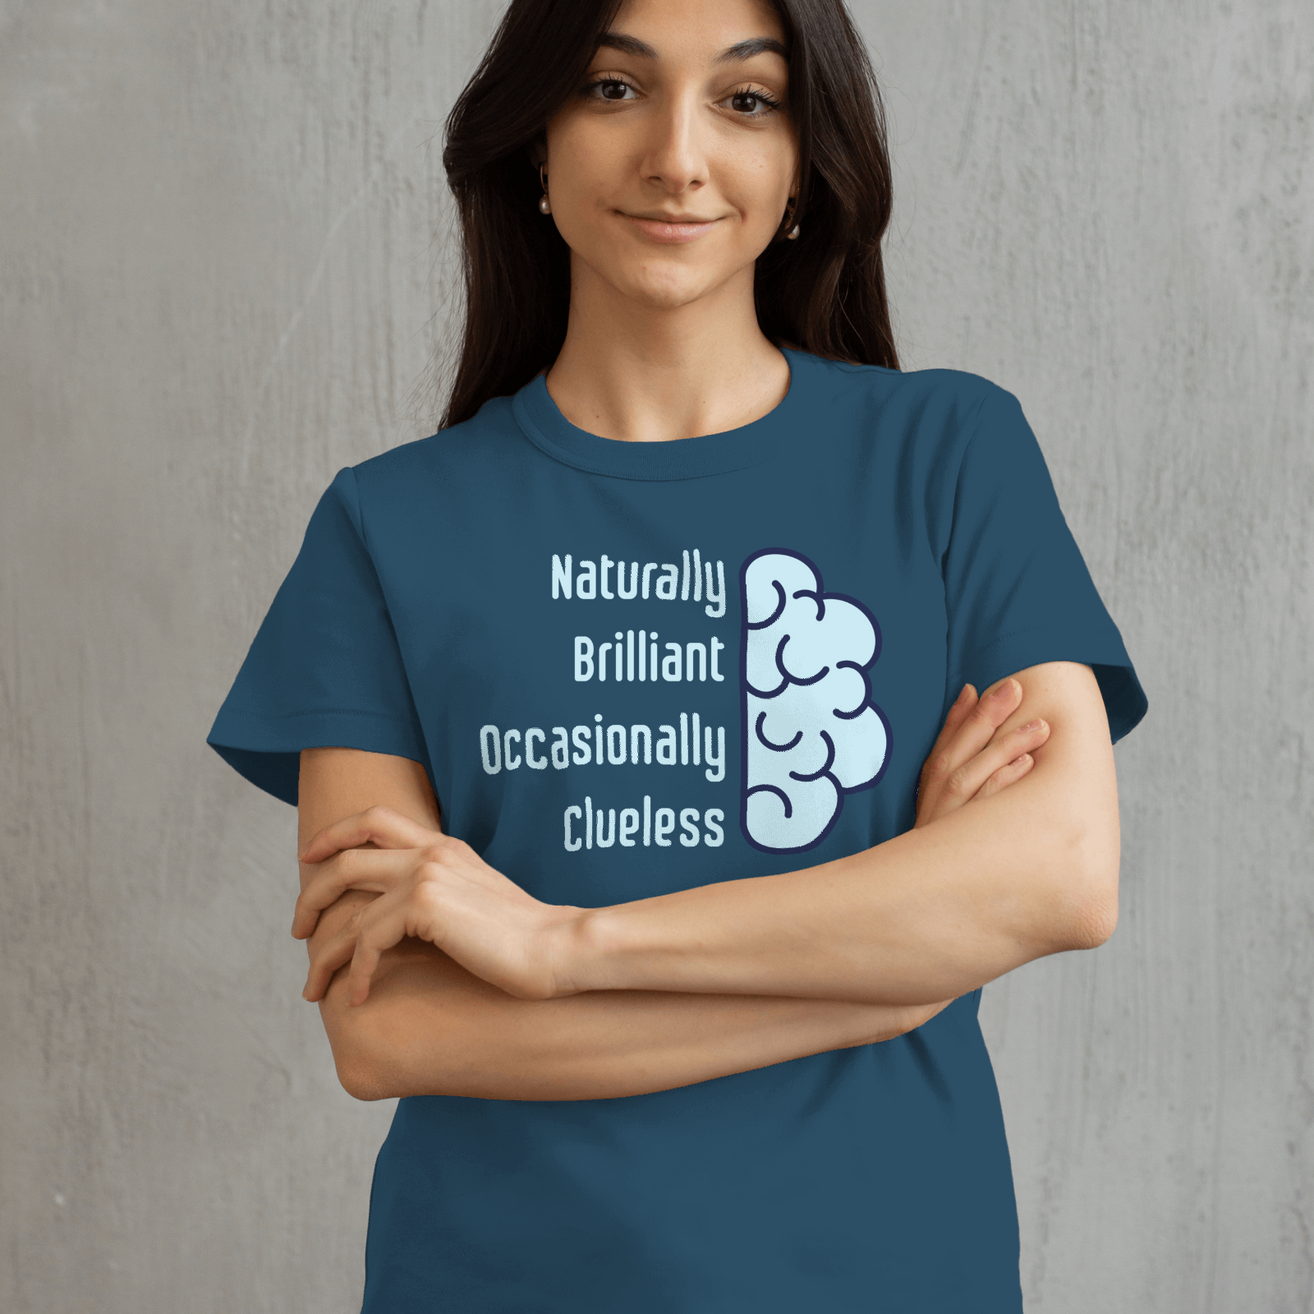 Naturally Brilliant Occasionally Clueless Women's Graphic T-Shirt